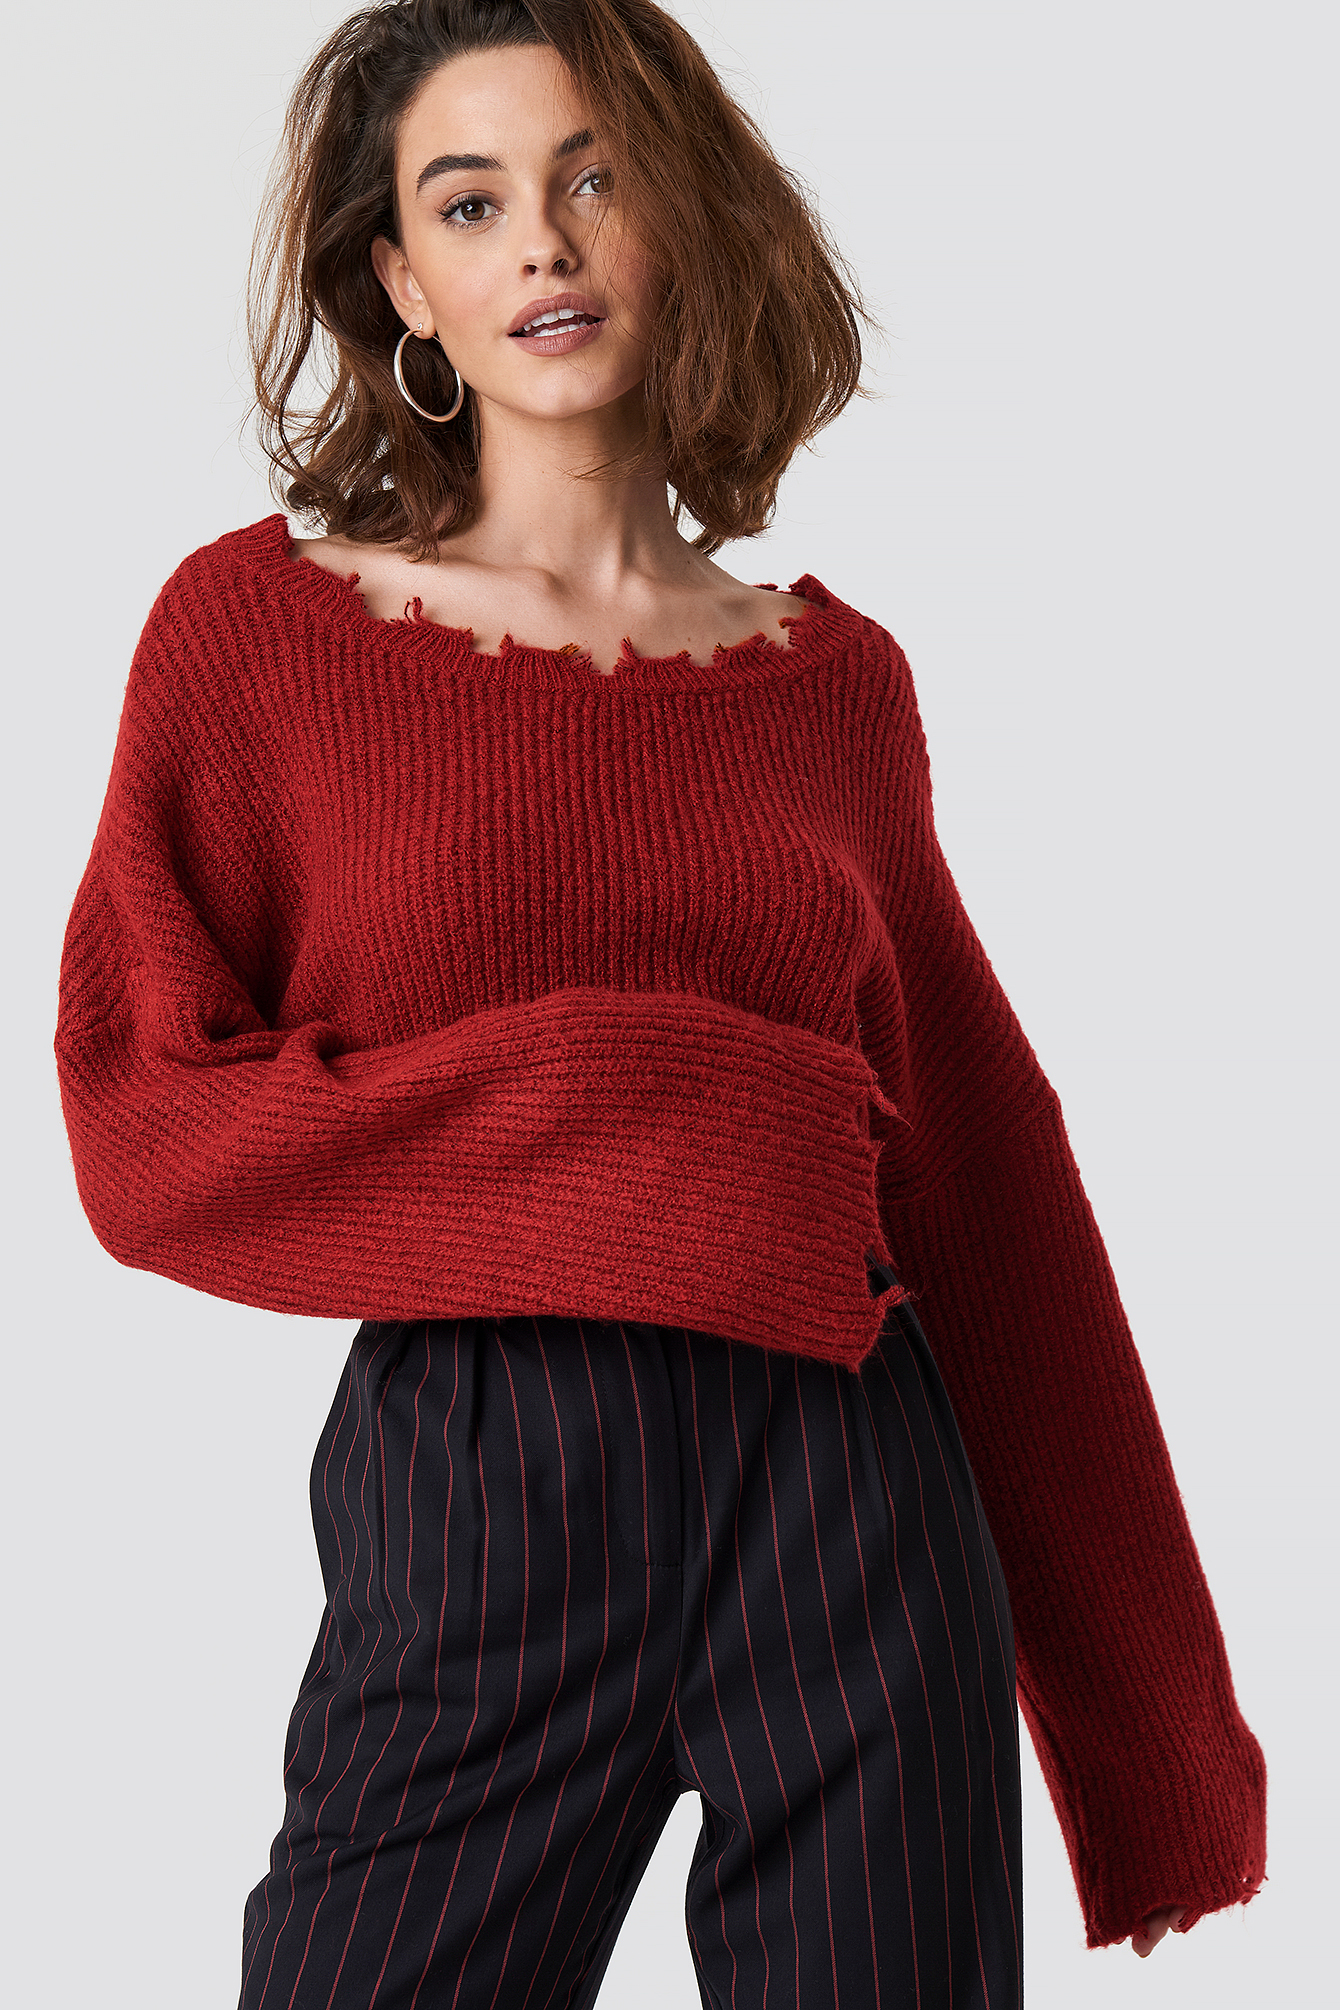 Red Slouchy Knit